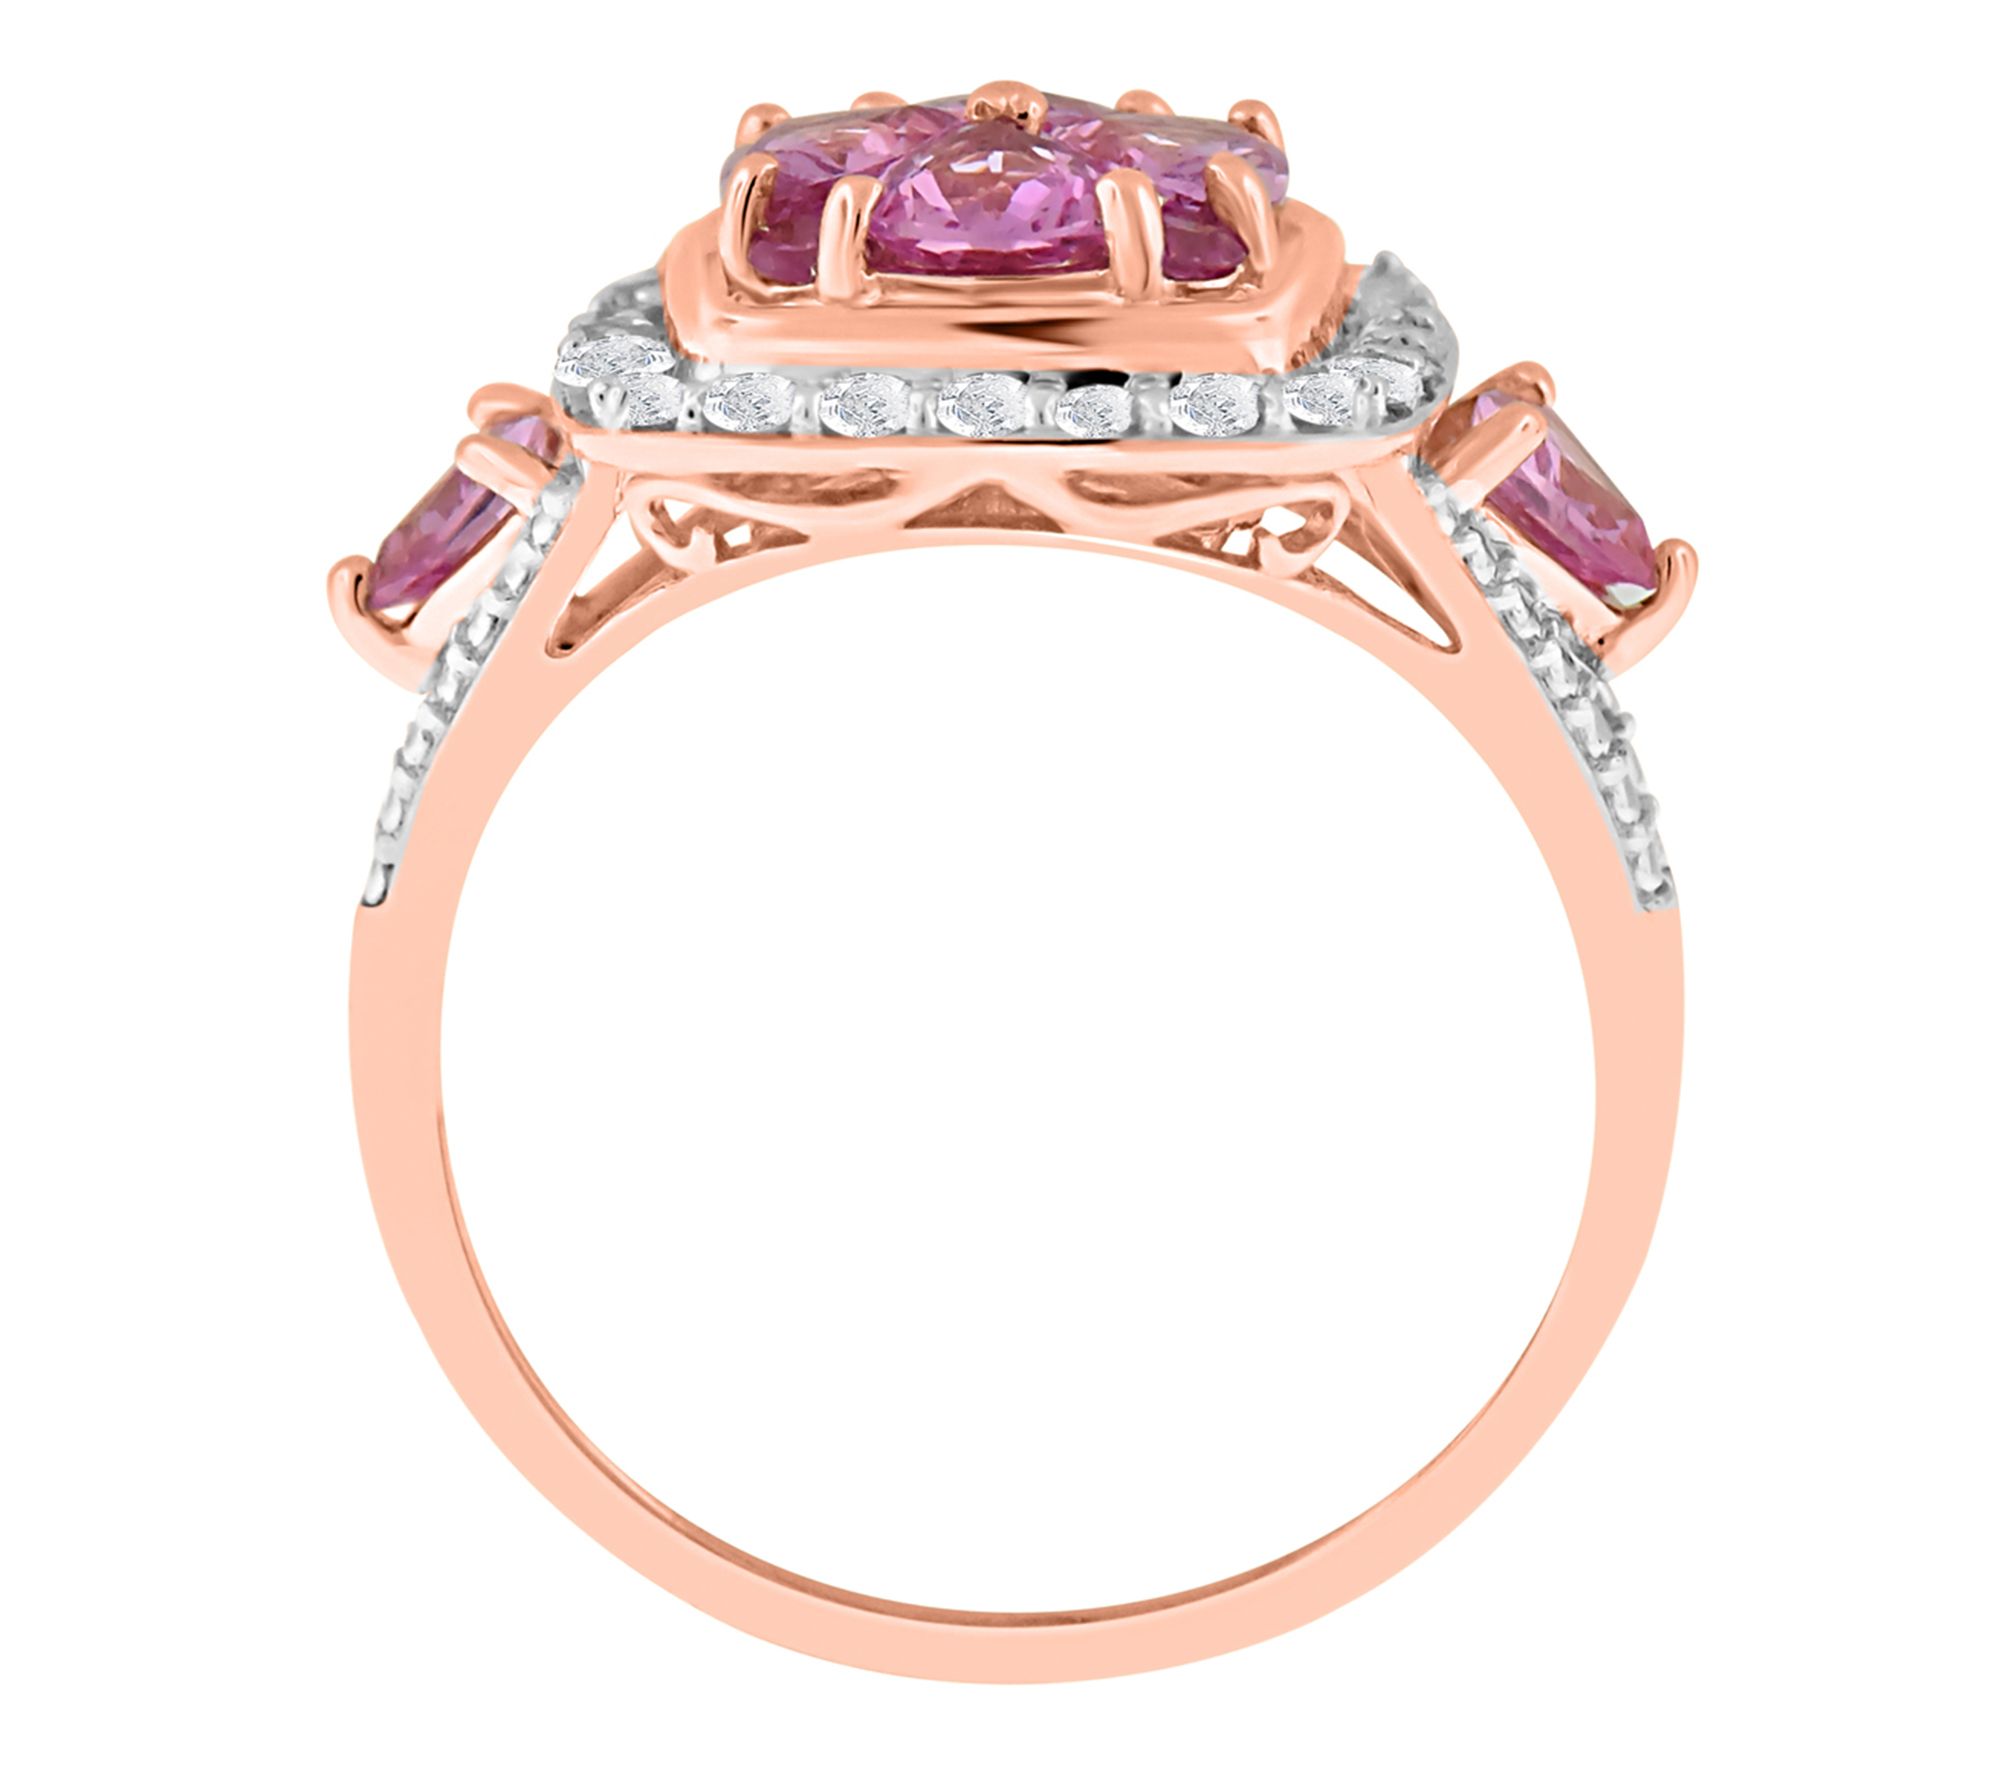 14K Gold 2.65 cttw Pink & White Sapphire Halo Ring - QVC.com